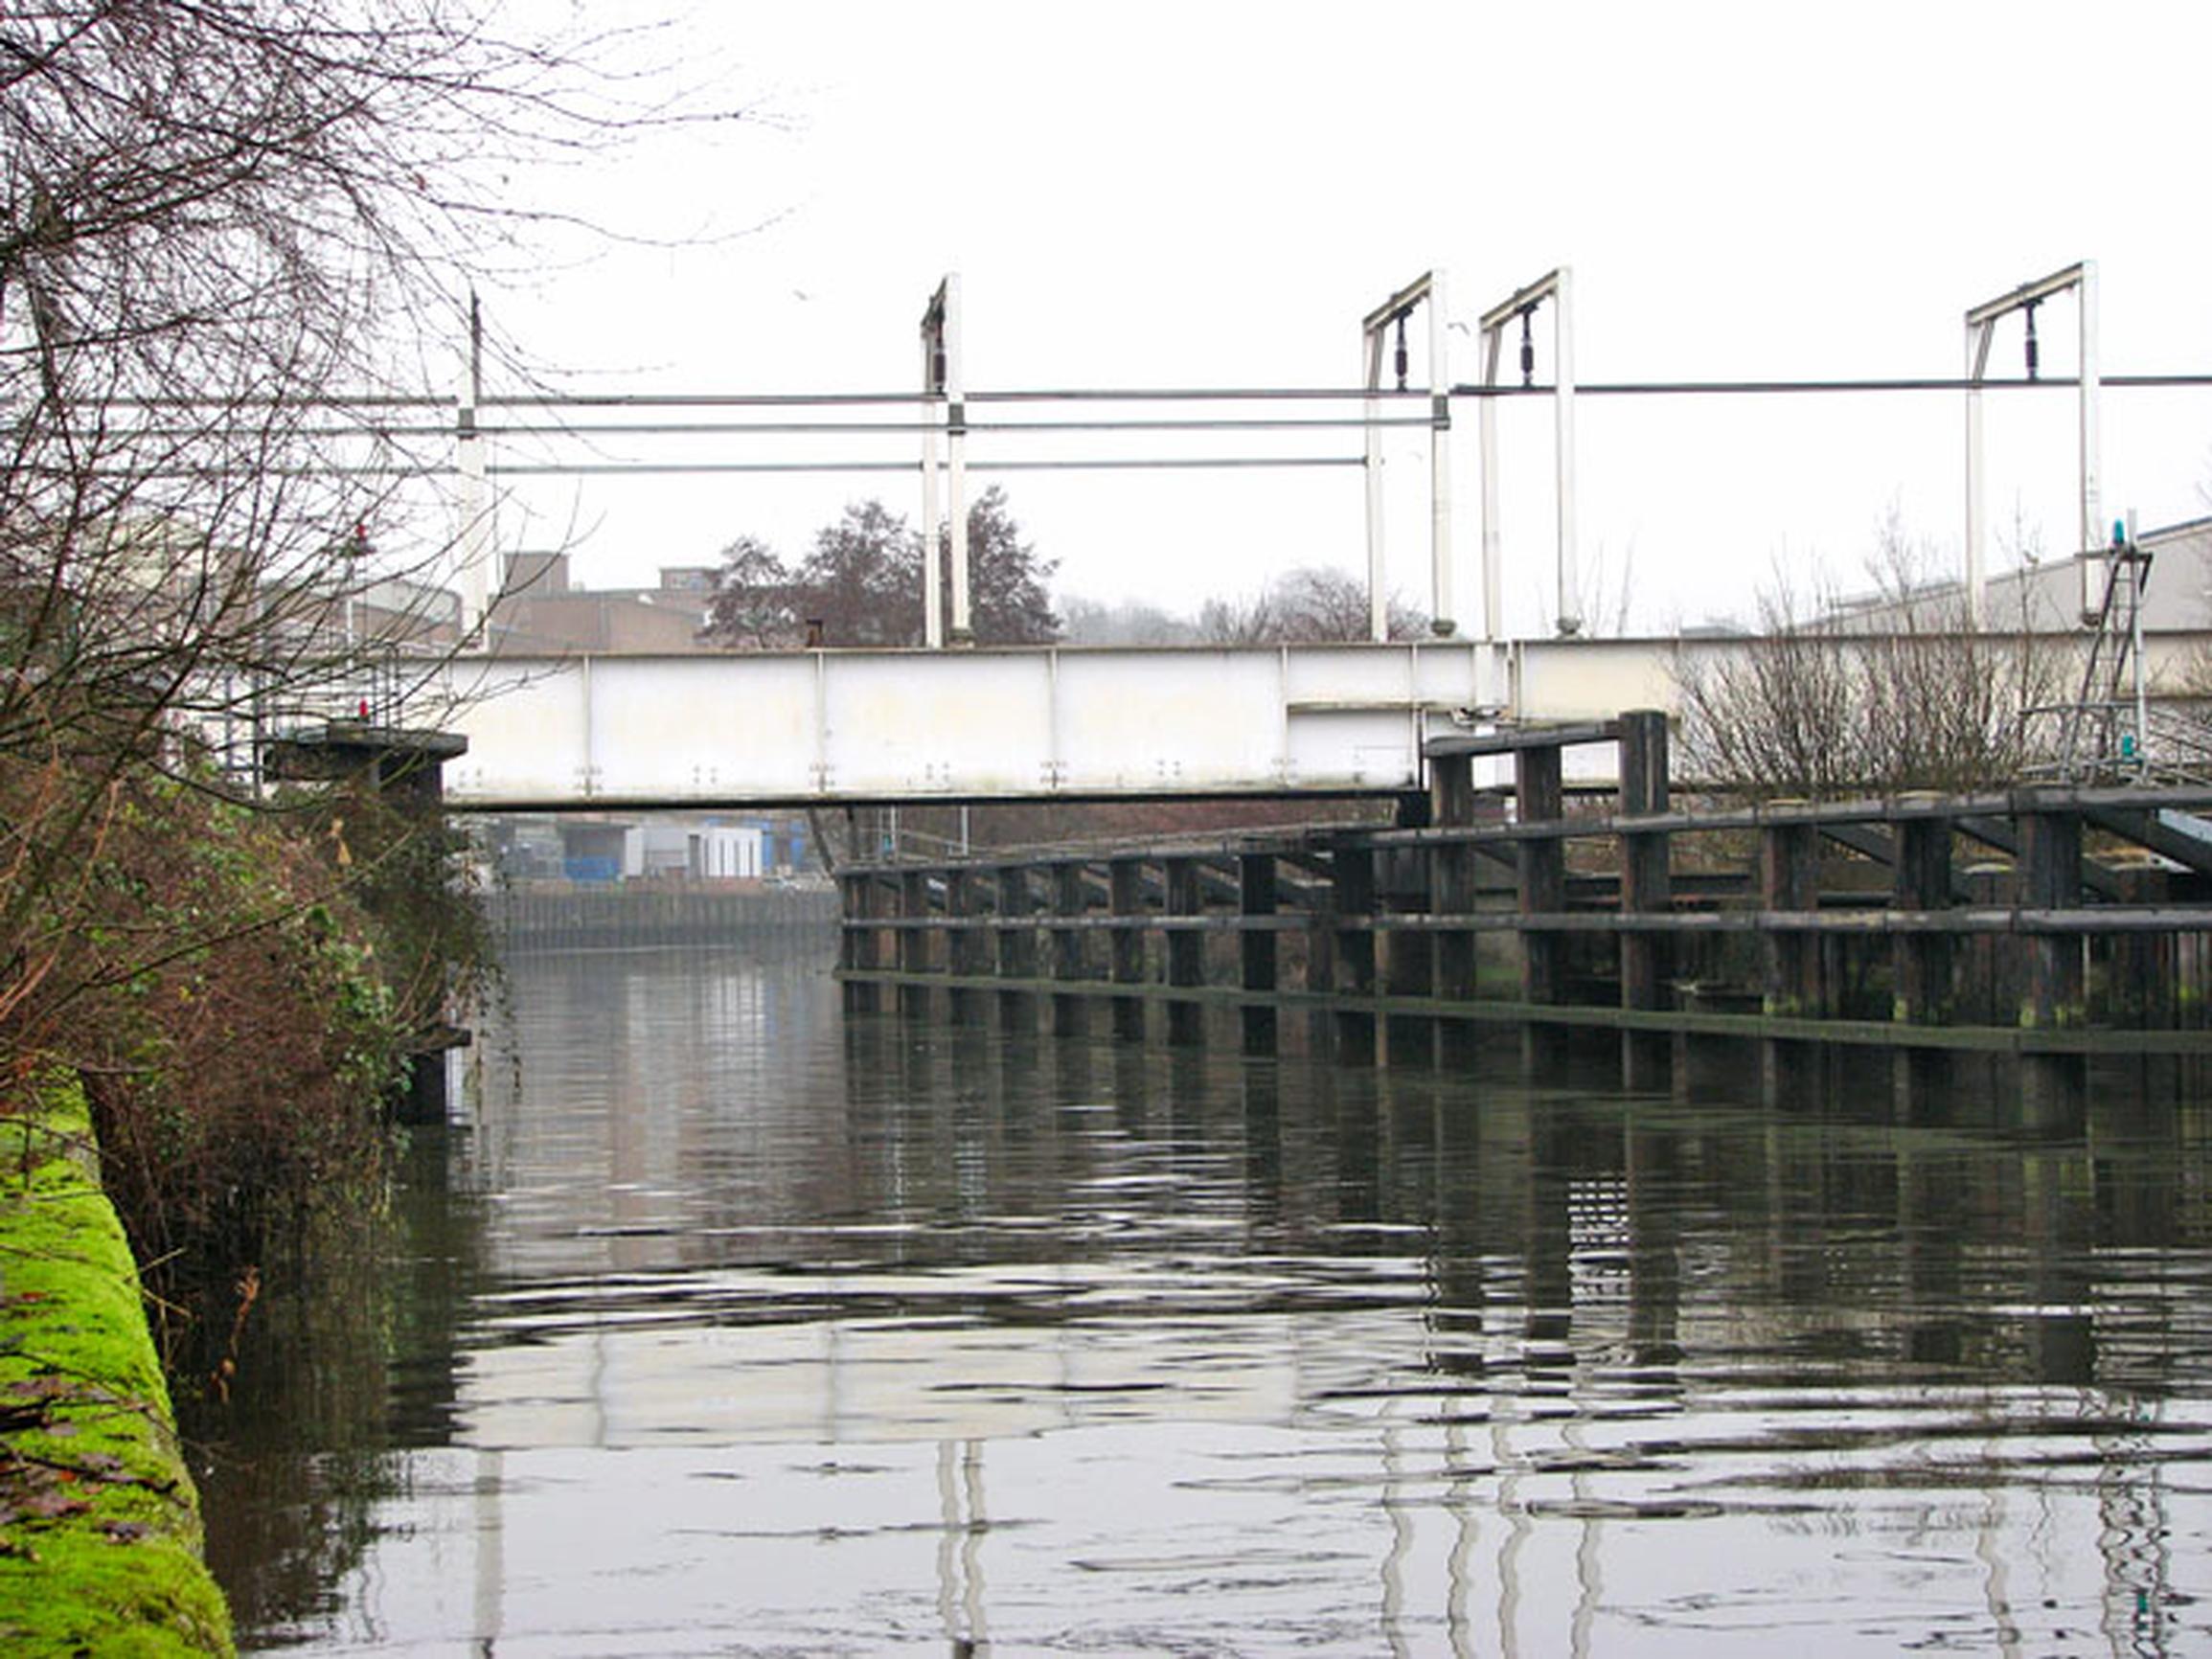 Trowse rail bridge: the current structure was installed in 1986